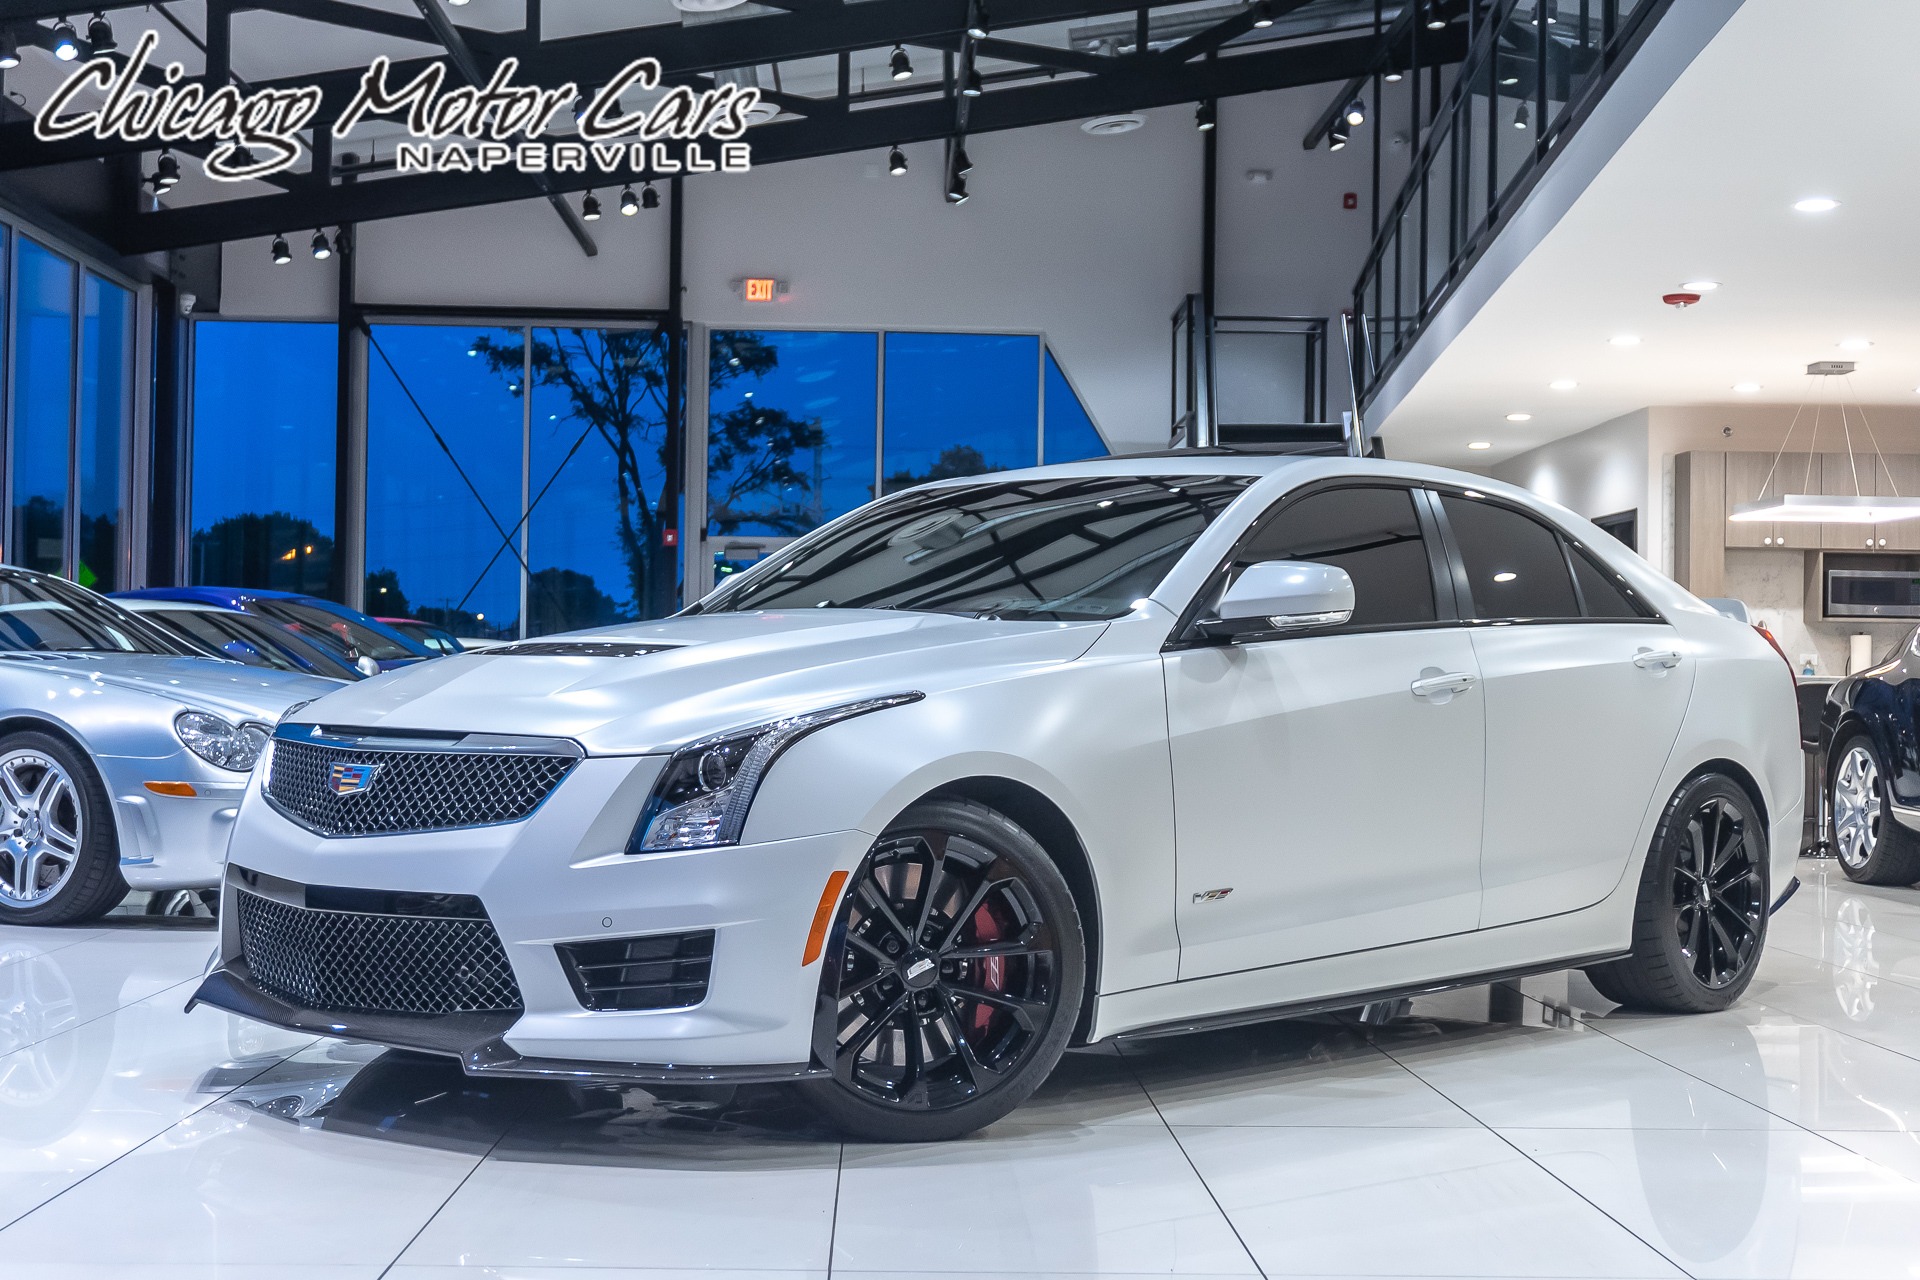 Used 2016 Cadillac ATS-V Sedan **#21 OF 102 CRYSTAL WHITE FROST EDITION**  For Sale (Special Pricing) | Chicago Motor Cars Stock #16262